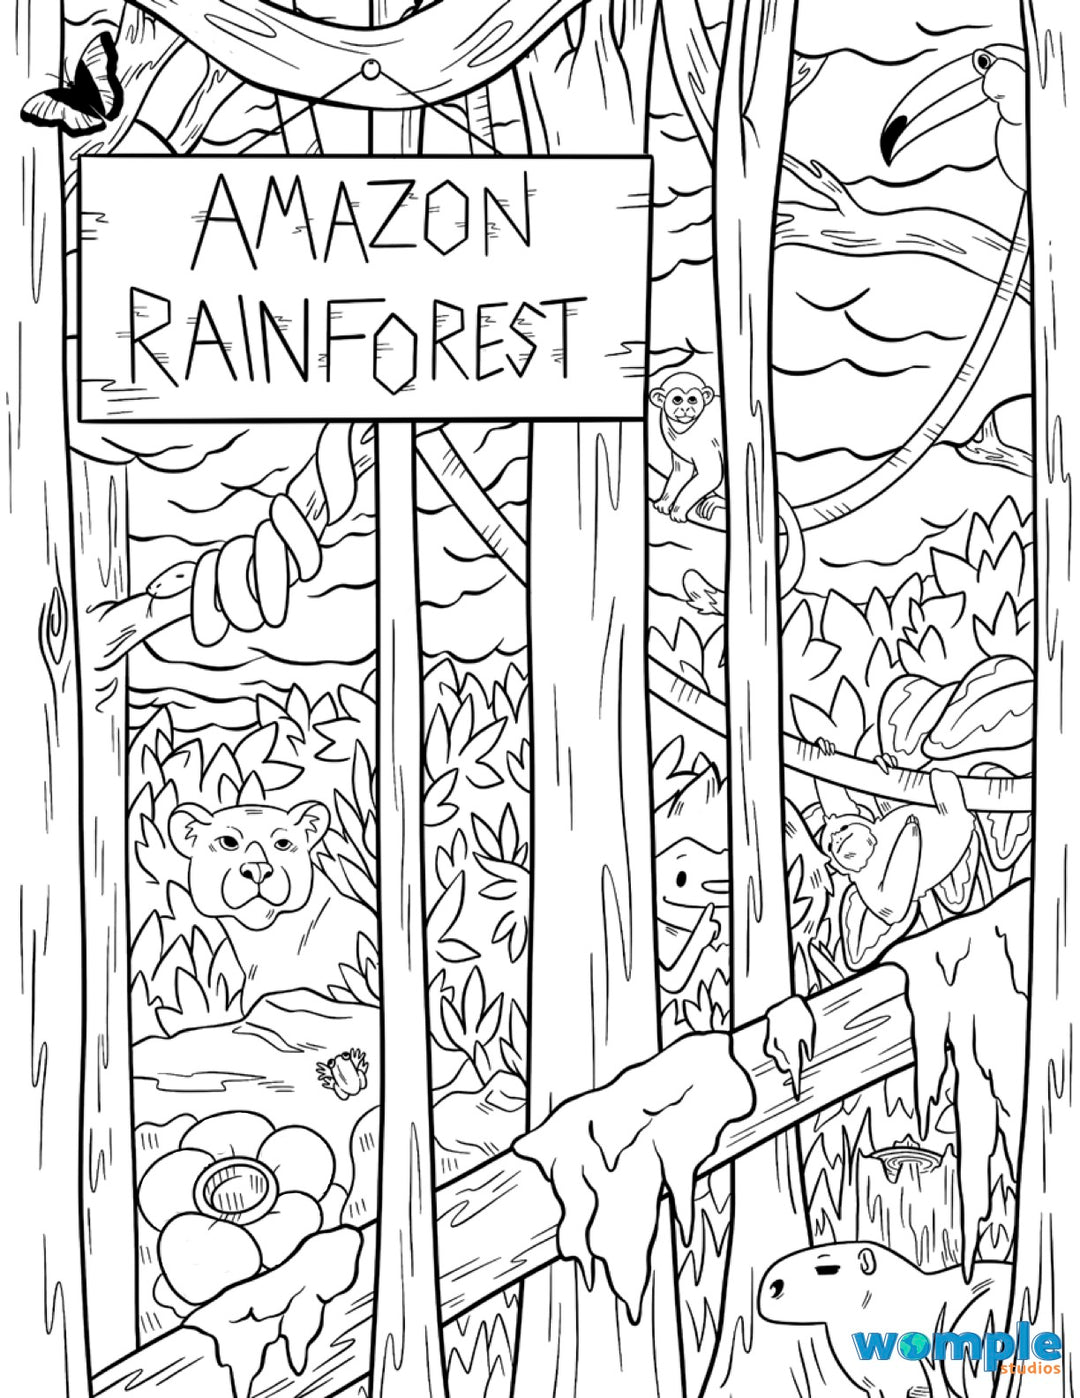 Amazon rainforest animals in a hidden picture and coloring page  